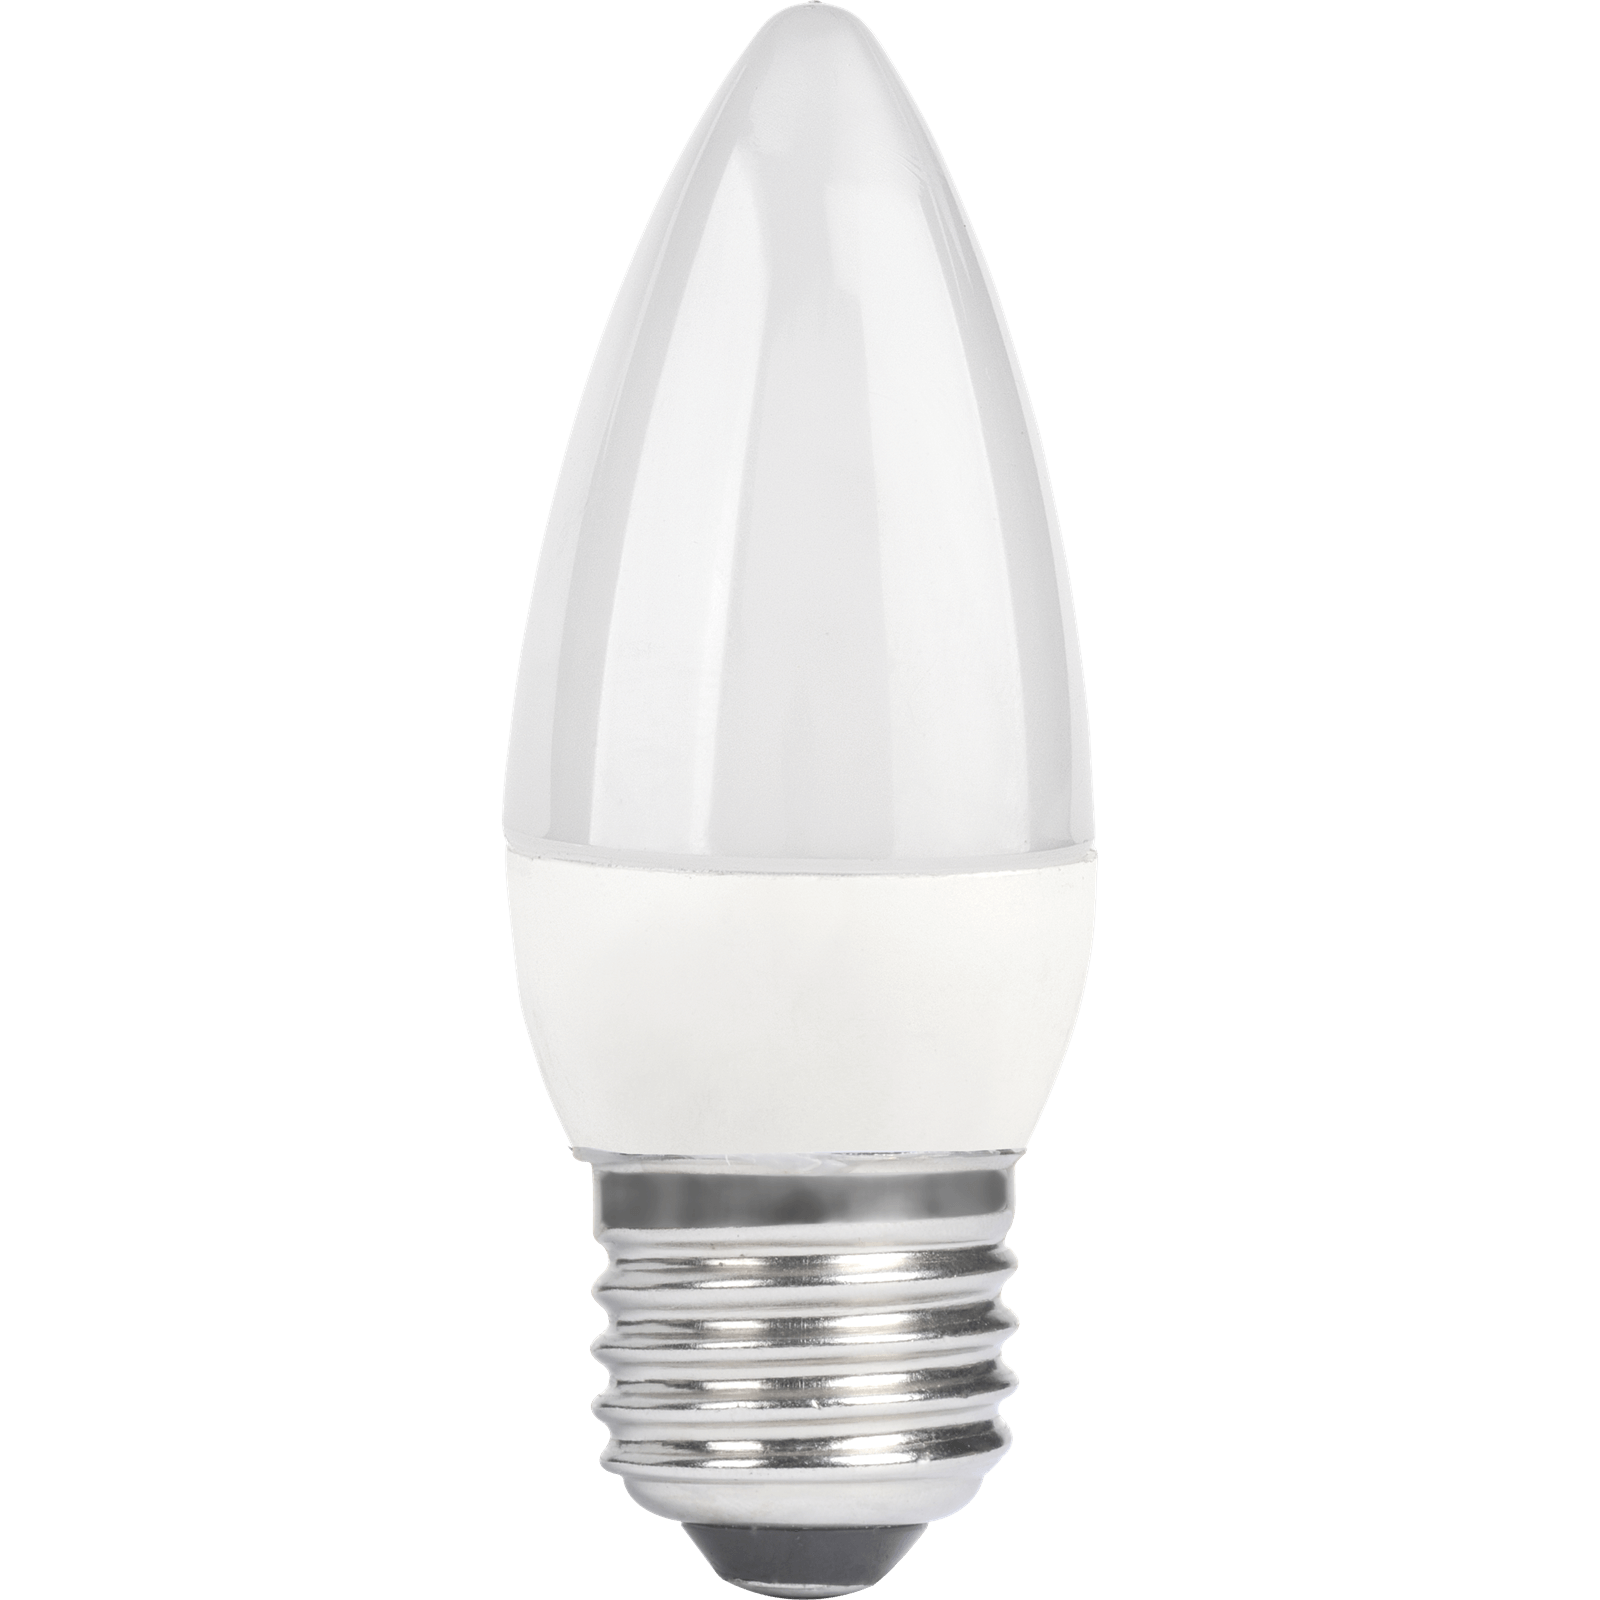 Photo of Tcp Candle 40w Es Warm Light Bulb - 2 Pack